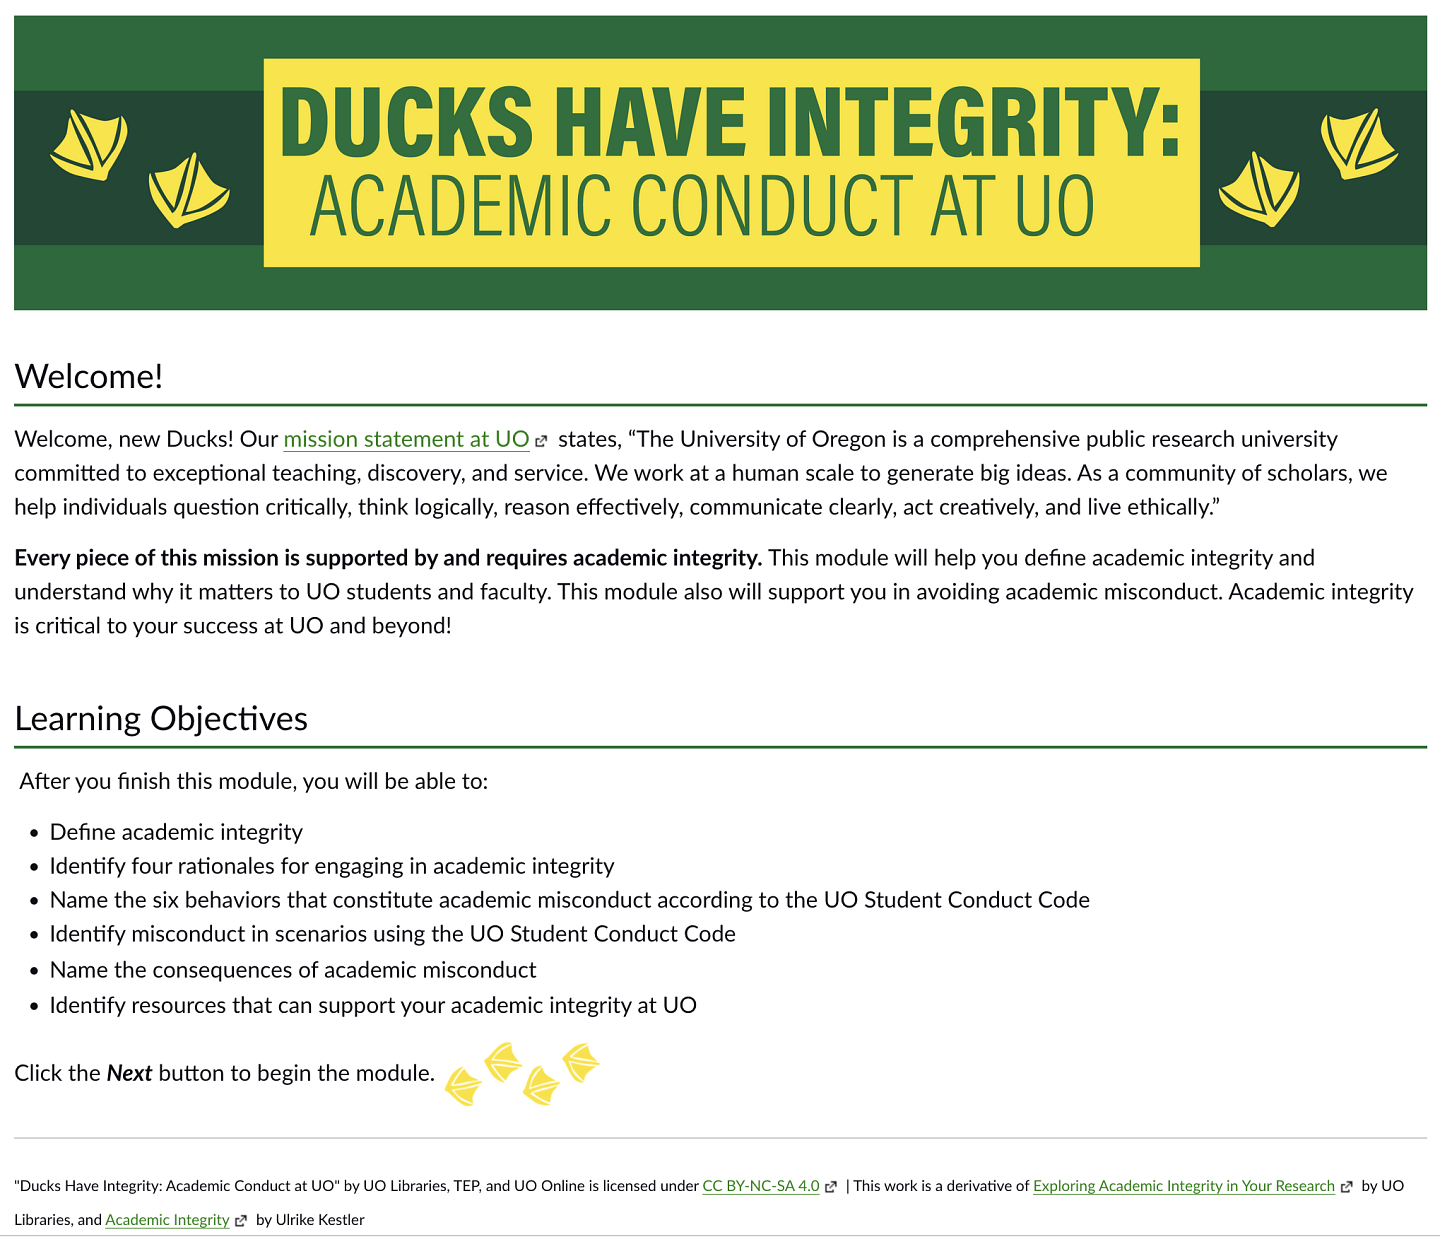 Graphical user interface featuring overview of Ducks Have Integrity Module